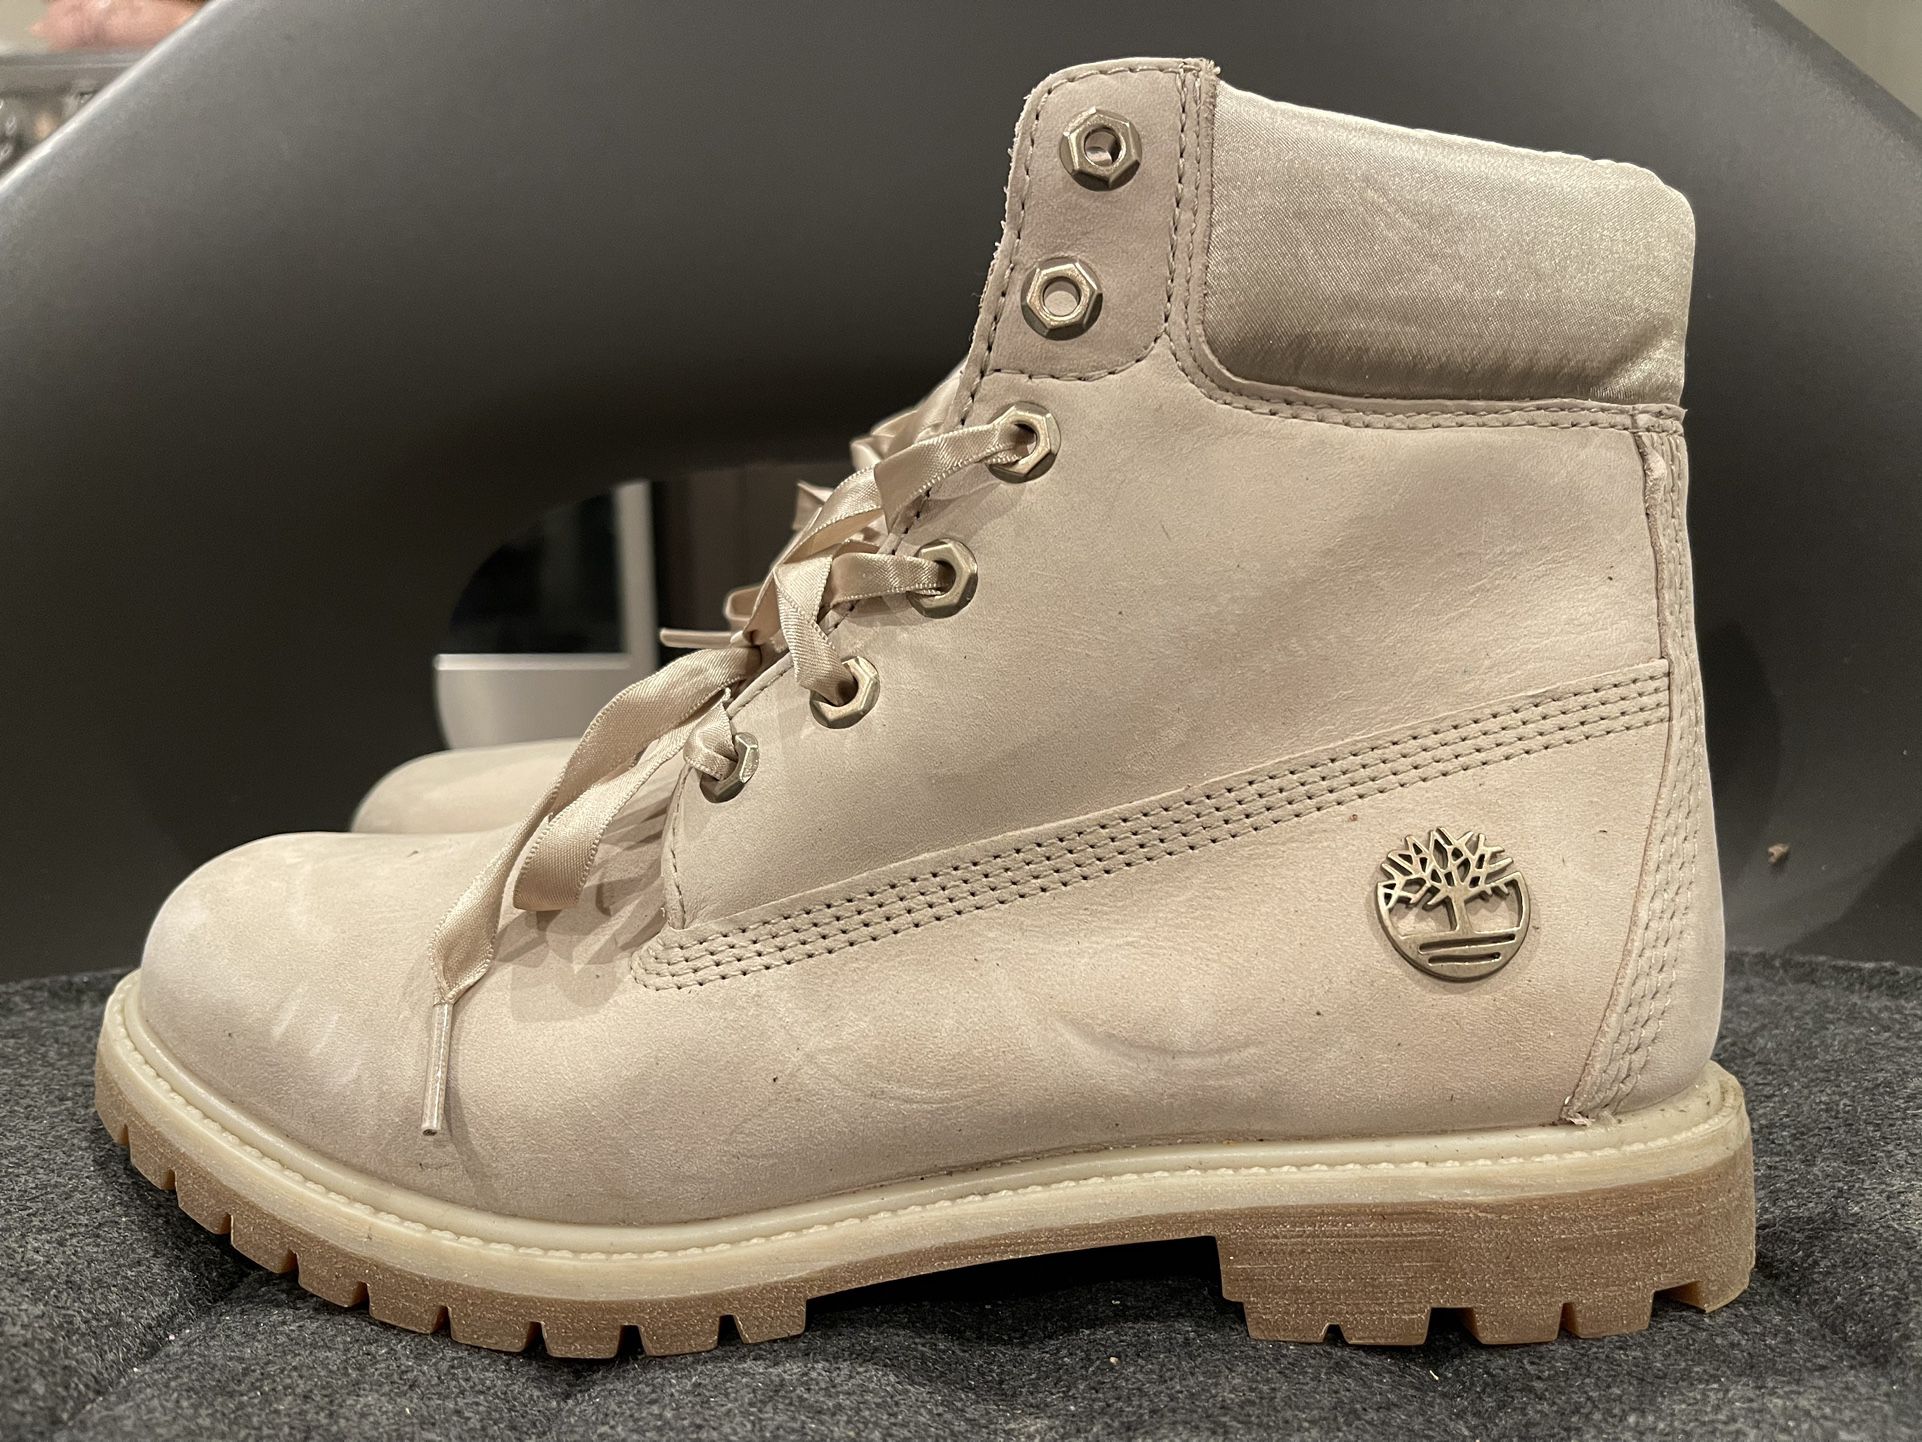 rush Speak loudly Mastery Timberland Premium 6” Boots Women's Size 8.5 - Made In Bangladesh. for Sale  in Bellevue, WA - OfferUp